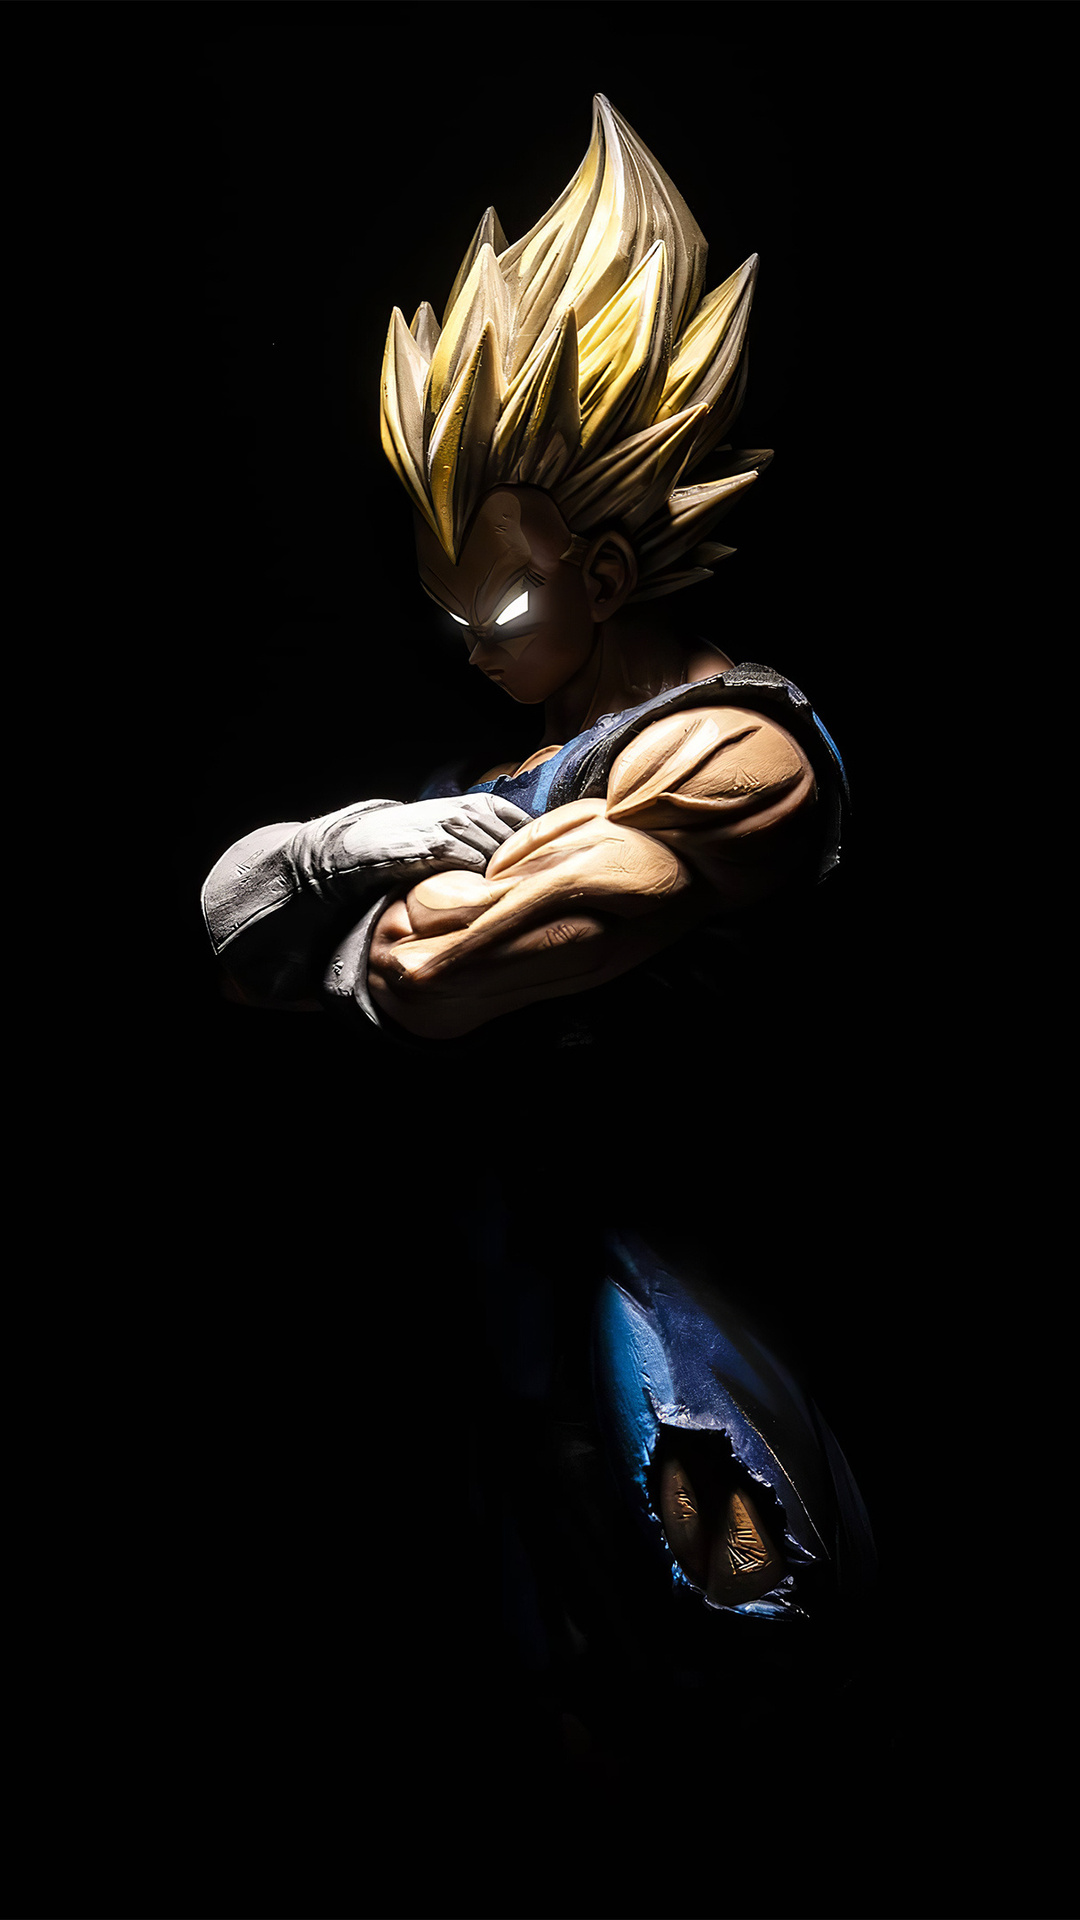 1080x19 Goku Anime 4k Iphone 7 6s 6 Plus Pixel Xl One Plus 3 3t 5 Hd 4k Wallpapers Images Backgrounds Photos And Pictures